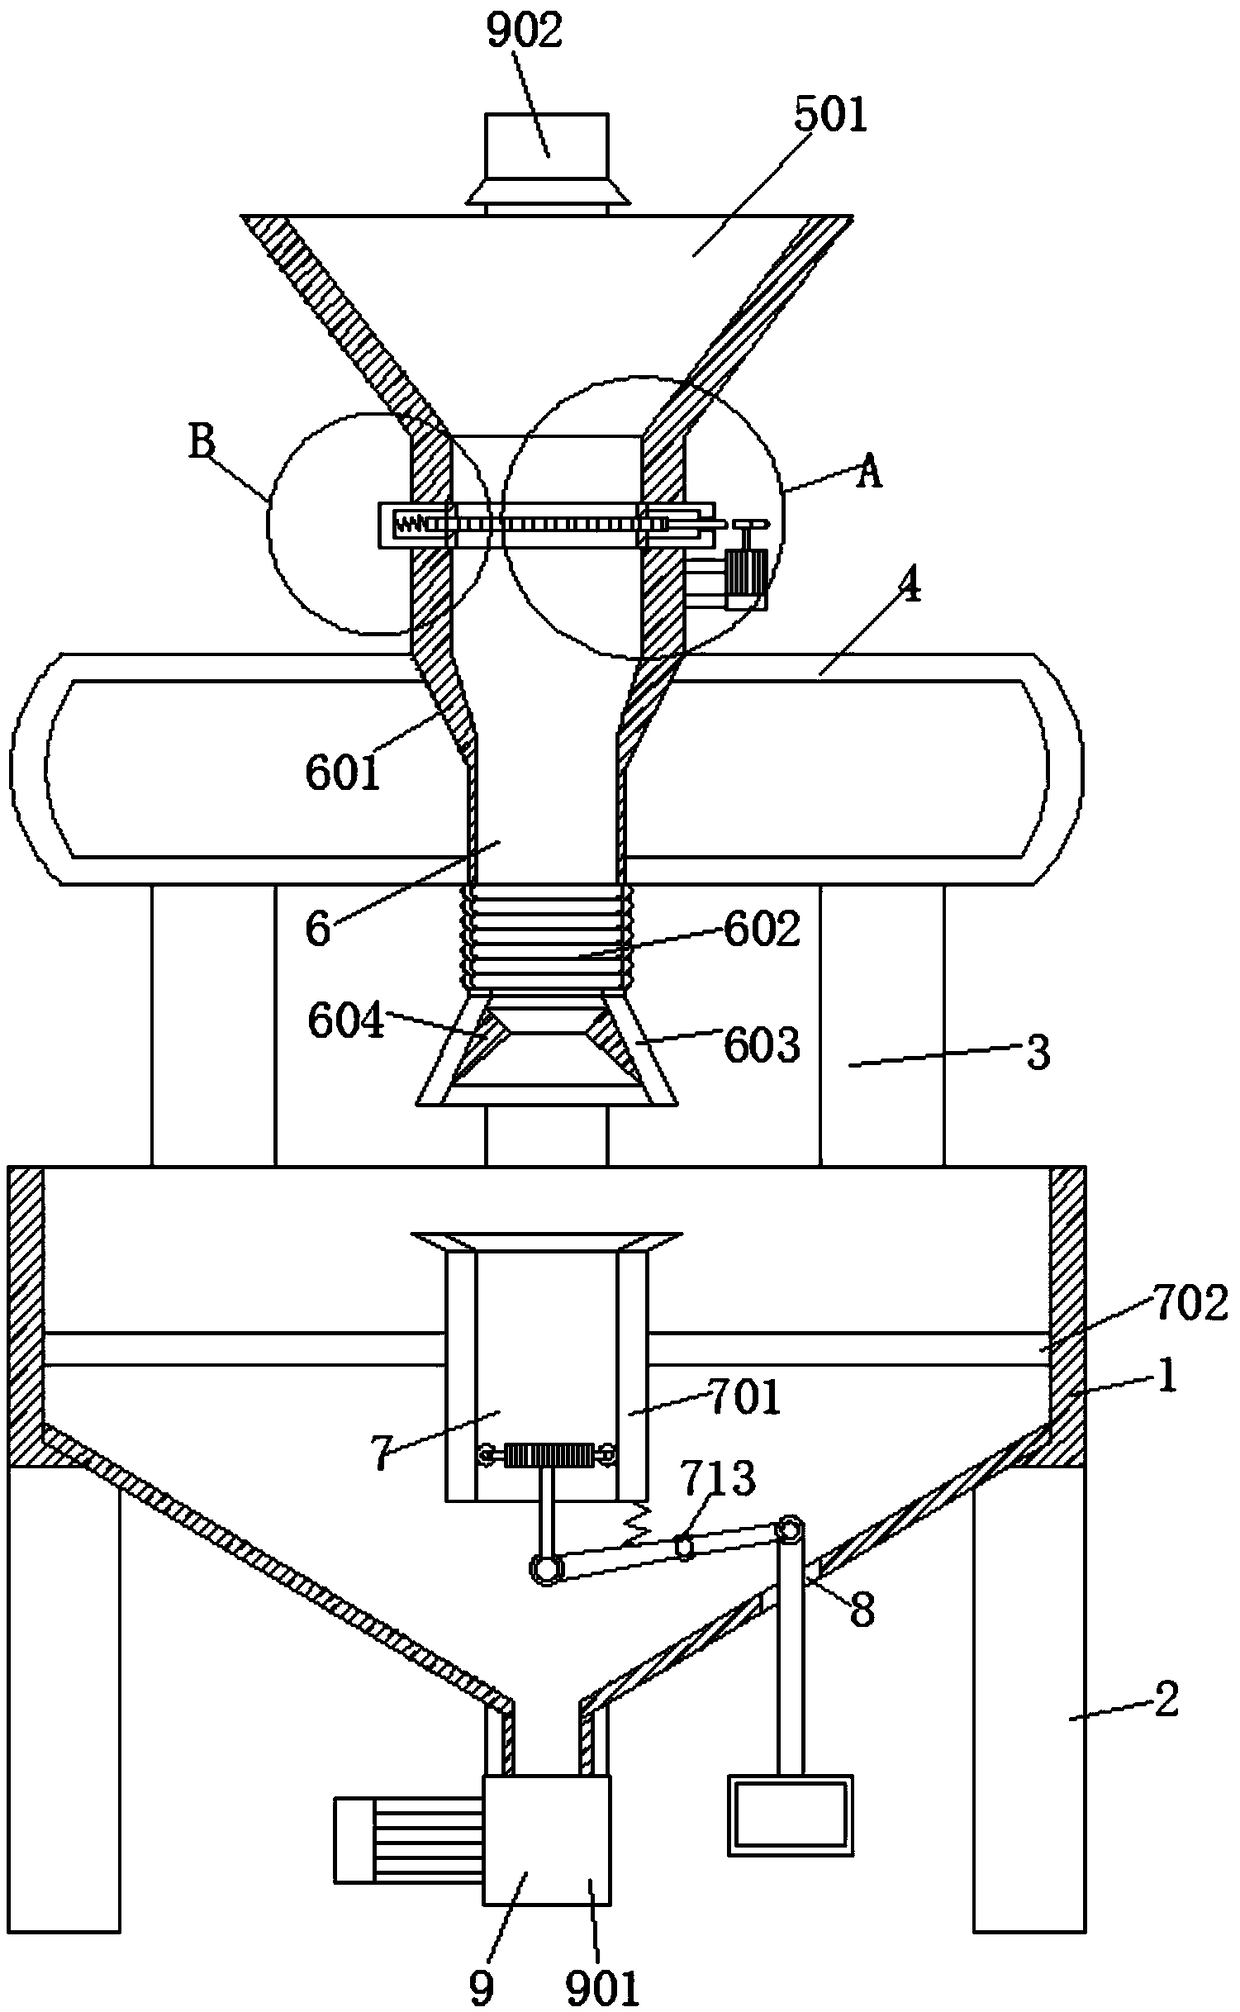 Semi-automatic filling equipment for lotus roots filled with glutinous rice